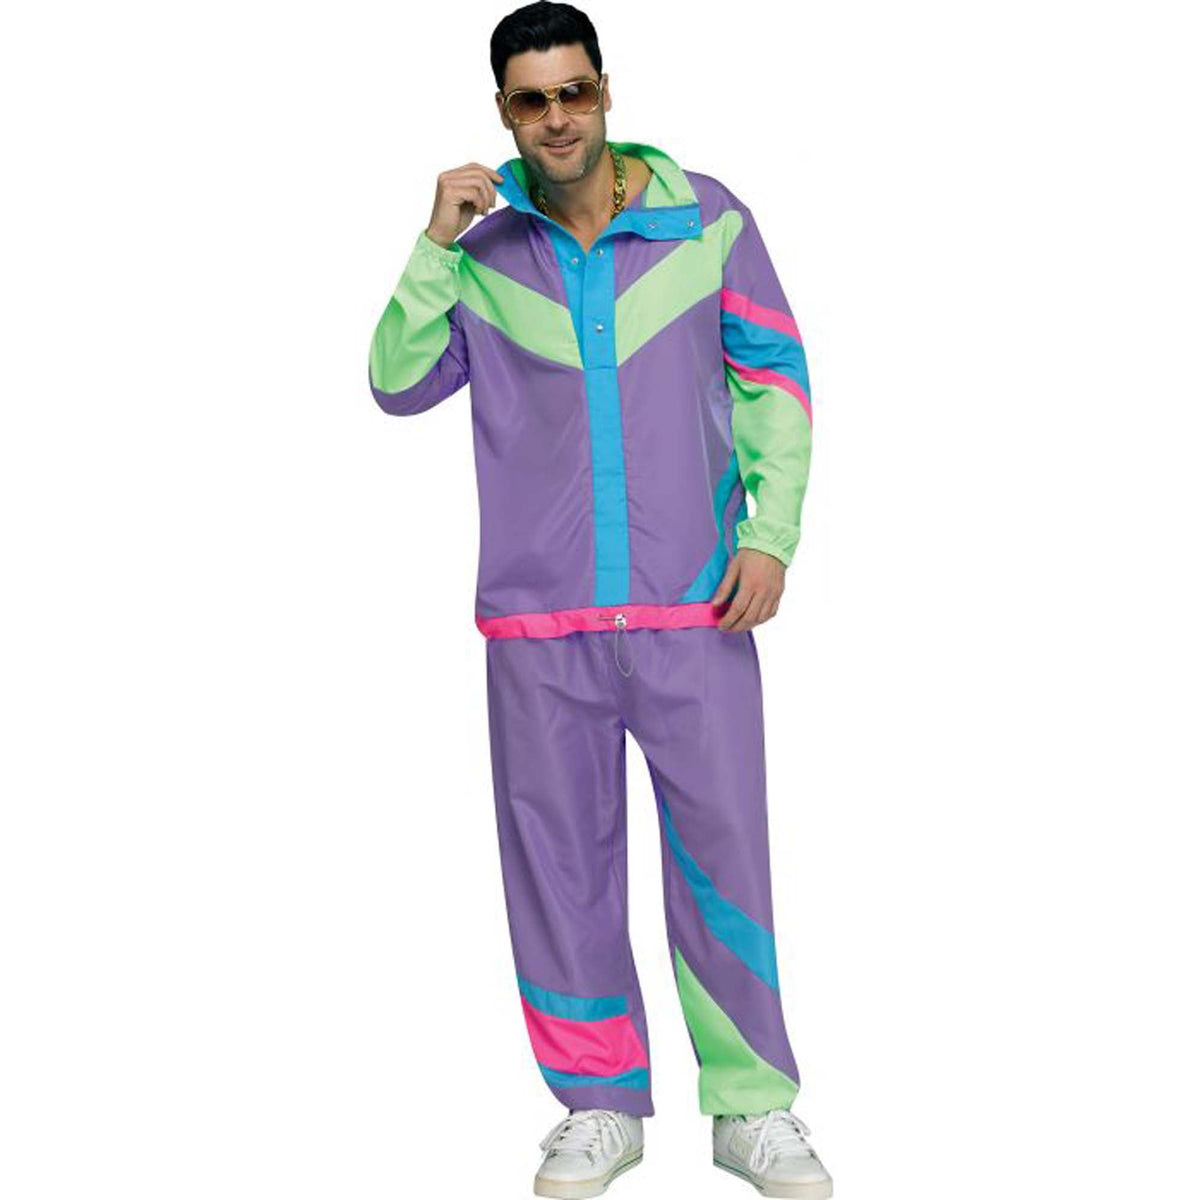 FUN WORLD Costumes Hip 80s Tracksuit Costume for Adults, Neon Jacket and Pants 071765147552